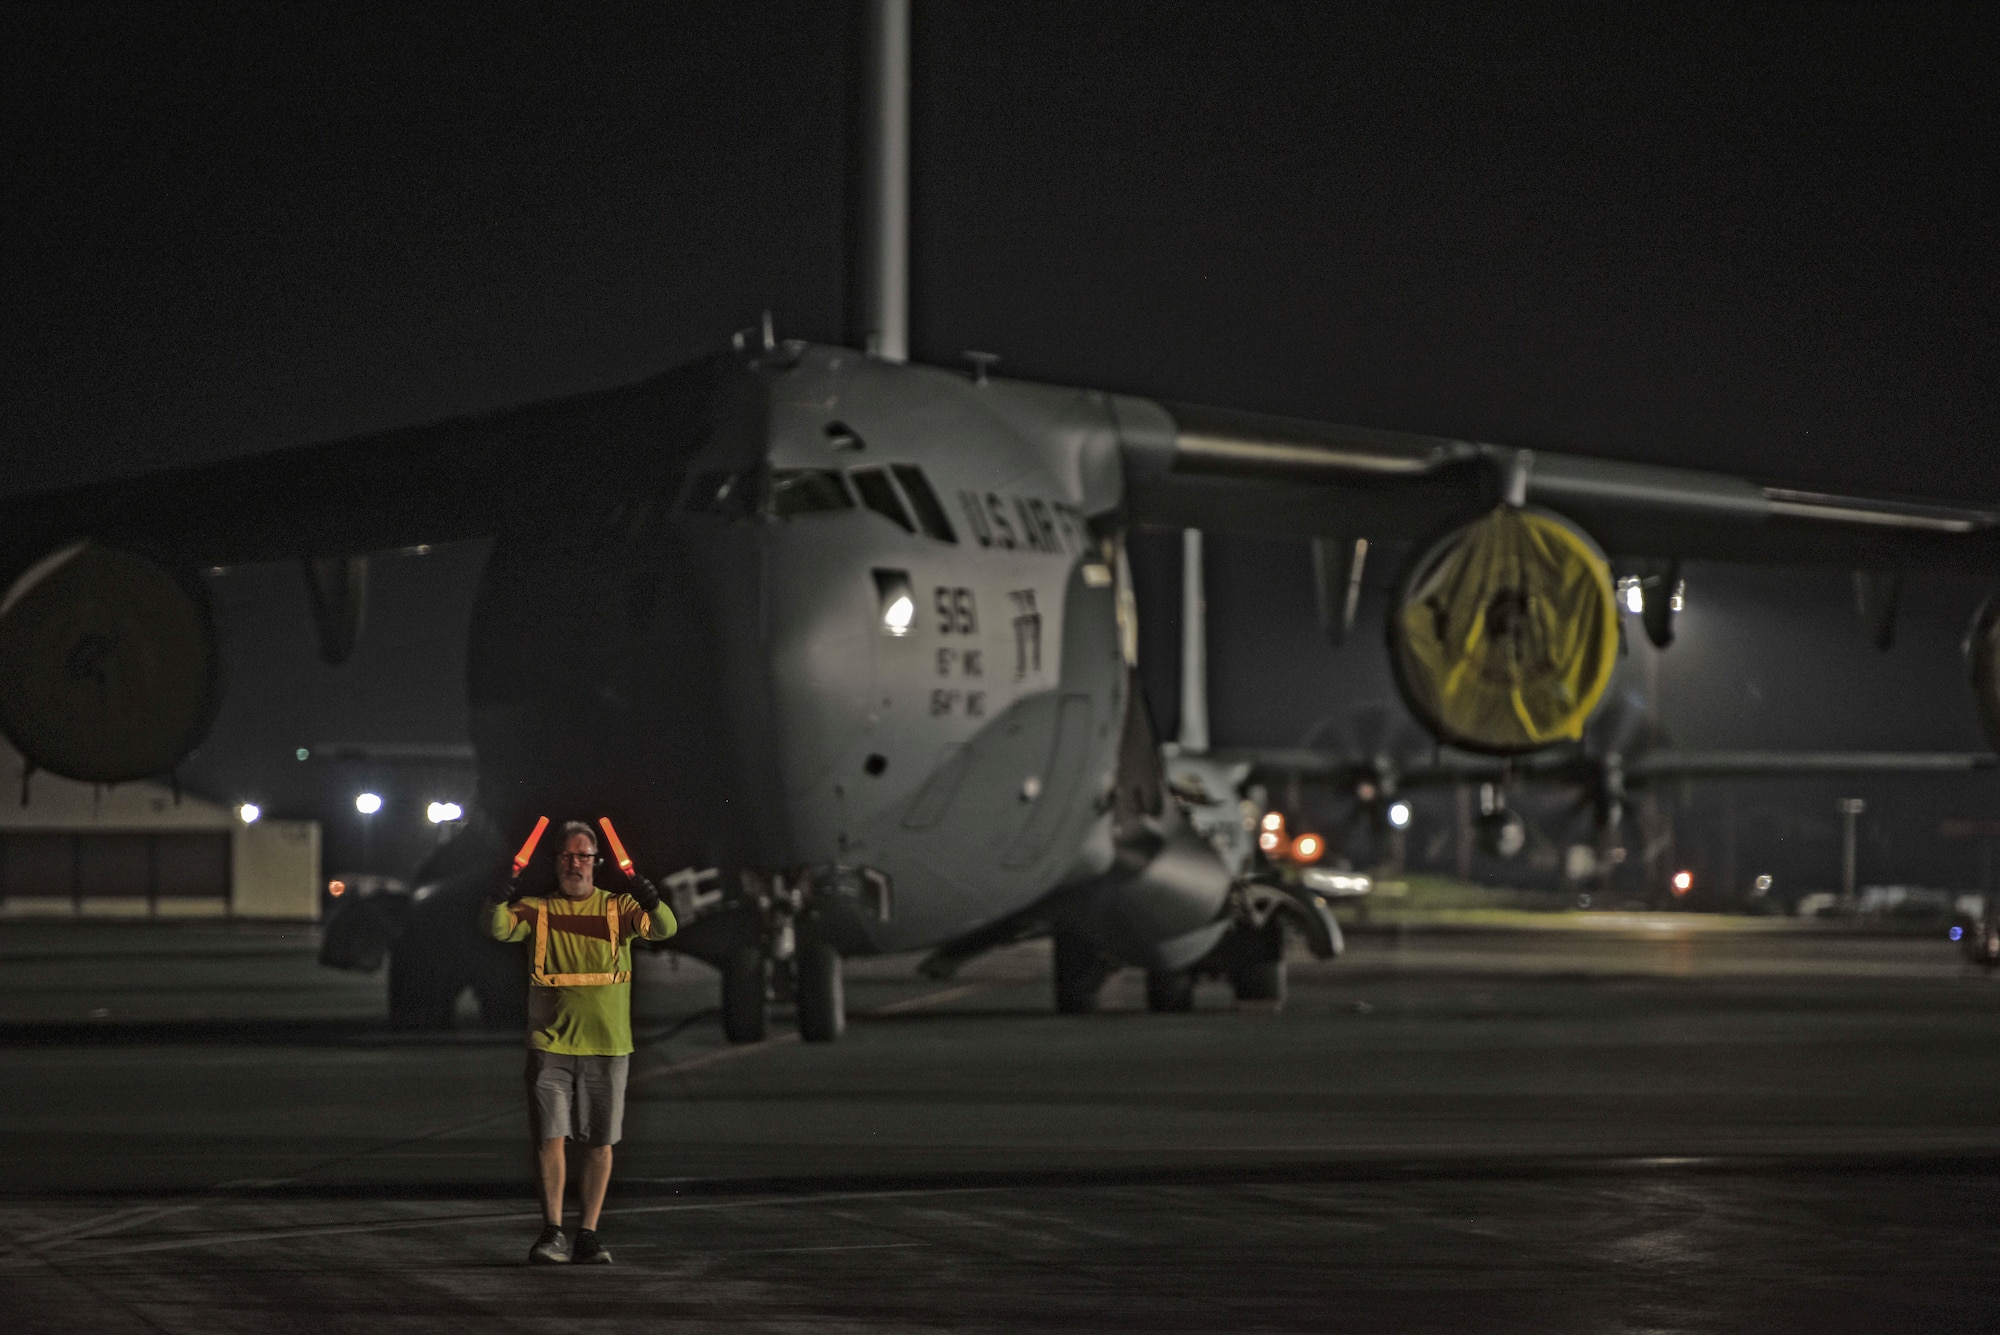 Bruce Miller, 735th Air Mobility Squadron Aircraft loader, spots a Tunner 60K loader driver on the flightline at Joint Base Pearl Harbor-Hickam, Hawaii, April  3, 2020. The 735th Air Mobility Squadron provided support to the Mariana Islands in response to the COVID-19 pandemic.  

 (U.S. Air Force photo by Tech. Sgt. Anthony Nelson Jr.)